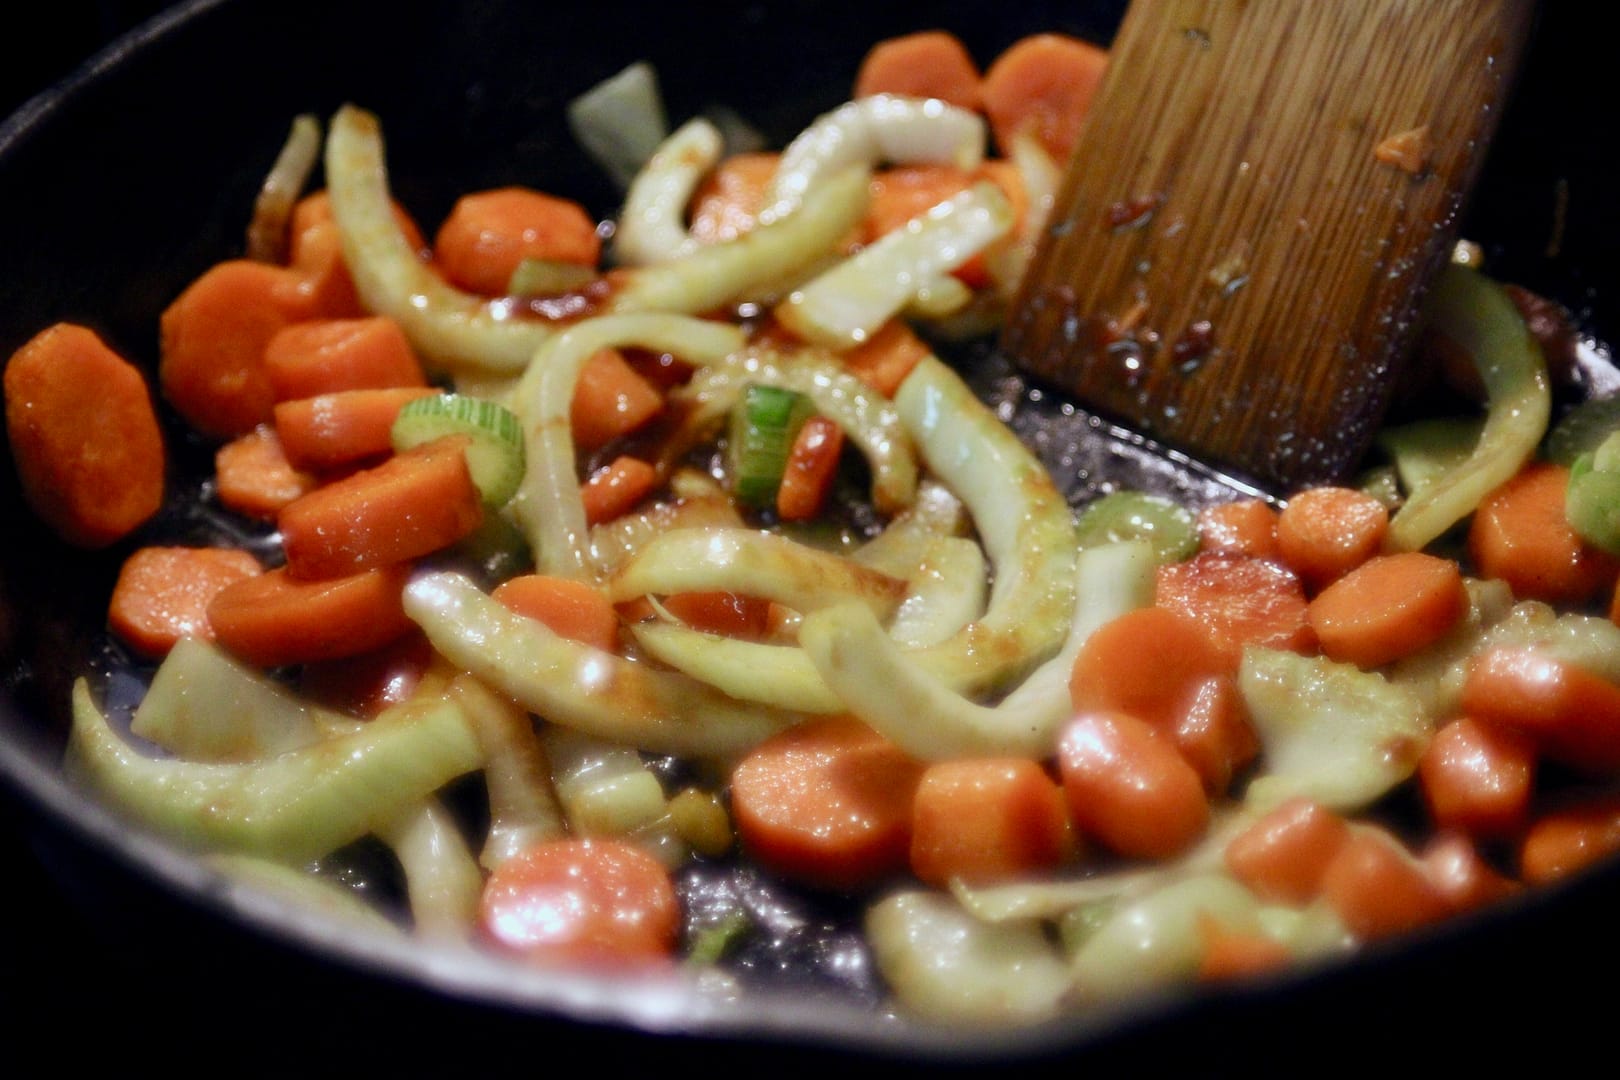 Sauteing the vegetables for the white beans.